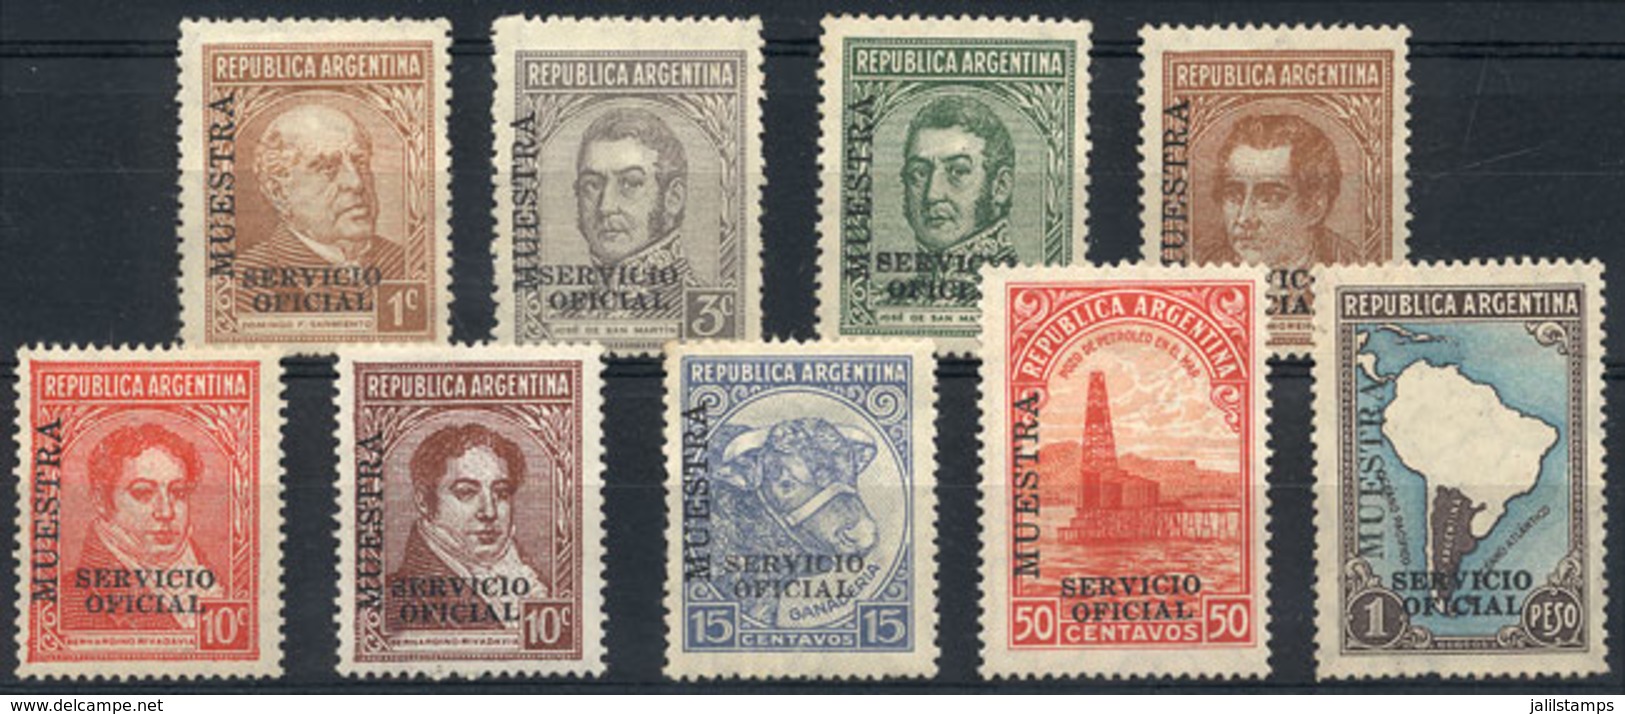 ARGENTINA: GJ.630 + Other Values, 9 Stamps Of The Proceres & Riquezas I Issue With MUESTRA Ovpt, VF Quality, Rare! - Dienstzegels